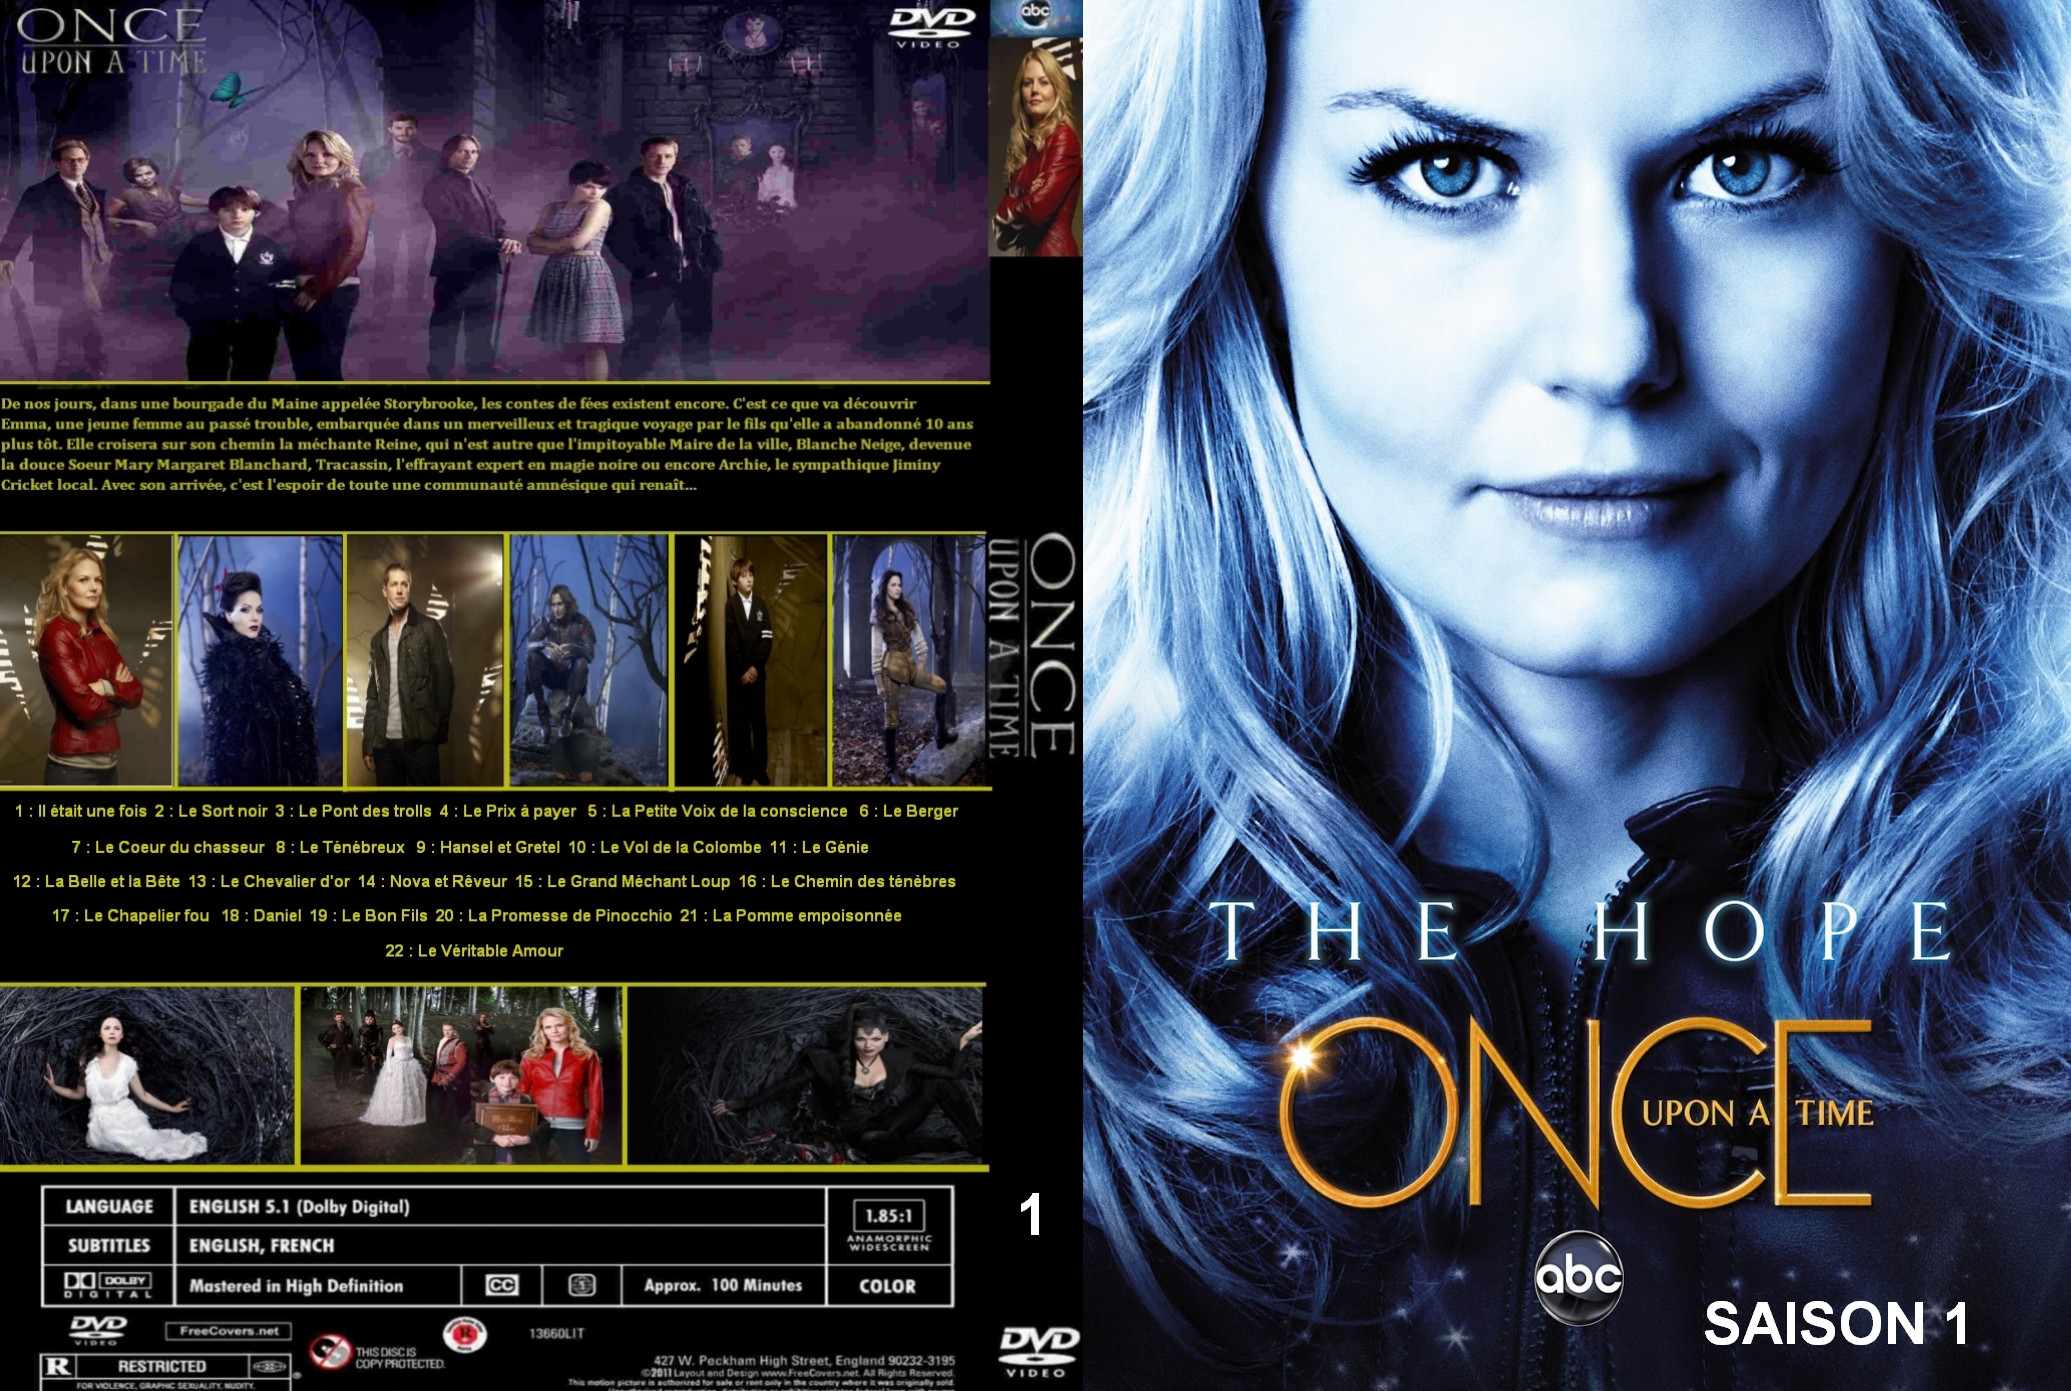 Jaquette DVD Once Upon A Time Saison 1 custom